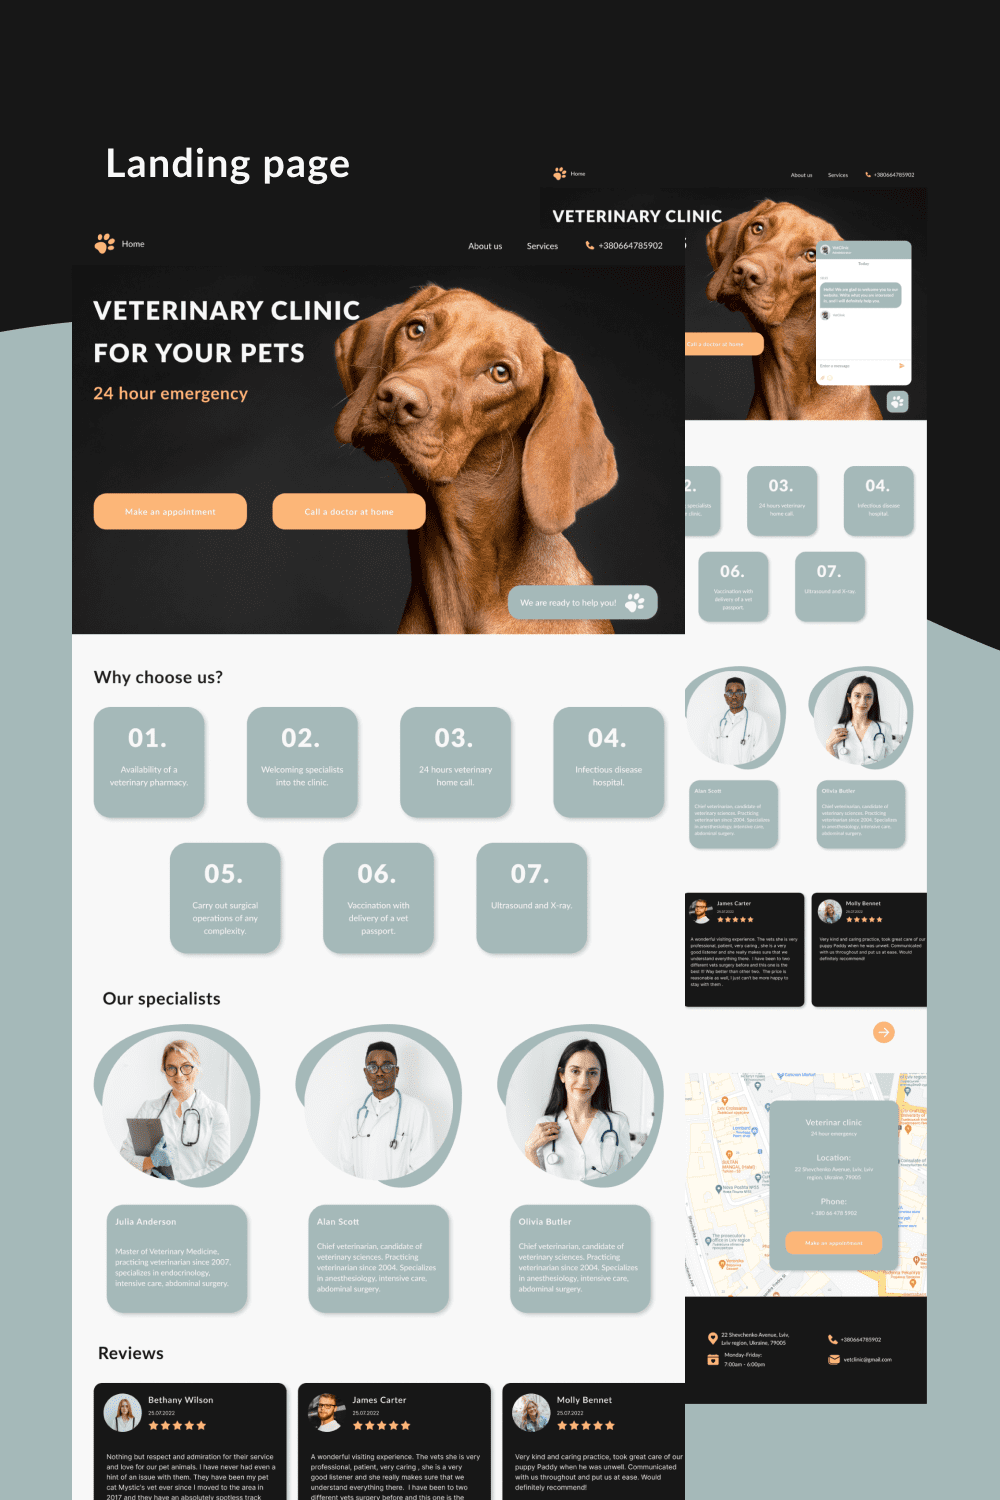 Pet Health Landing Page For Veterinary Clinic Template Pinterest Image.